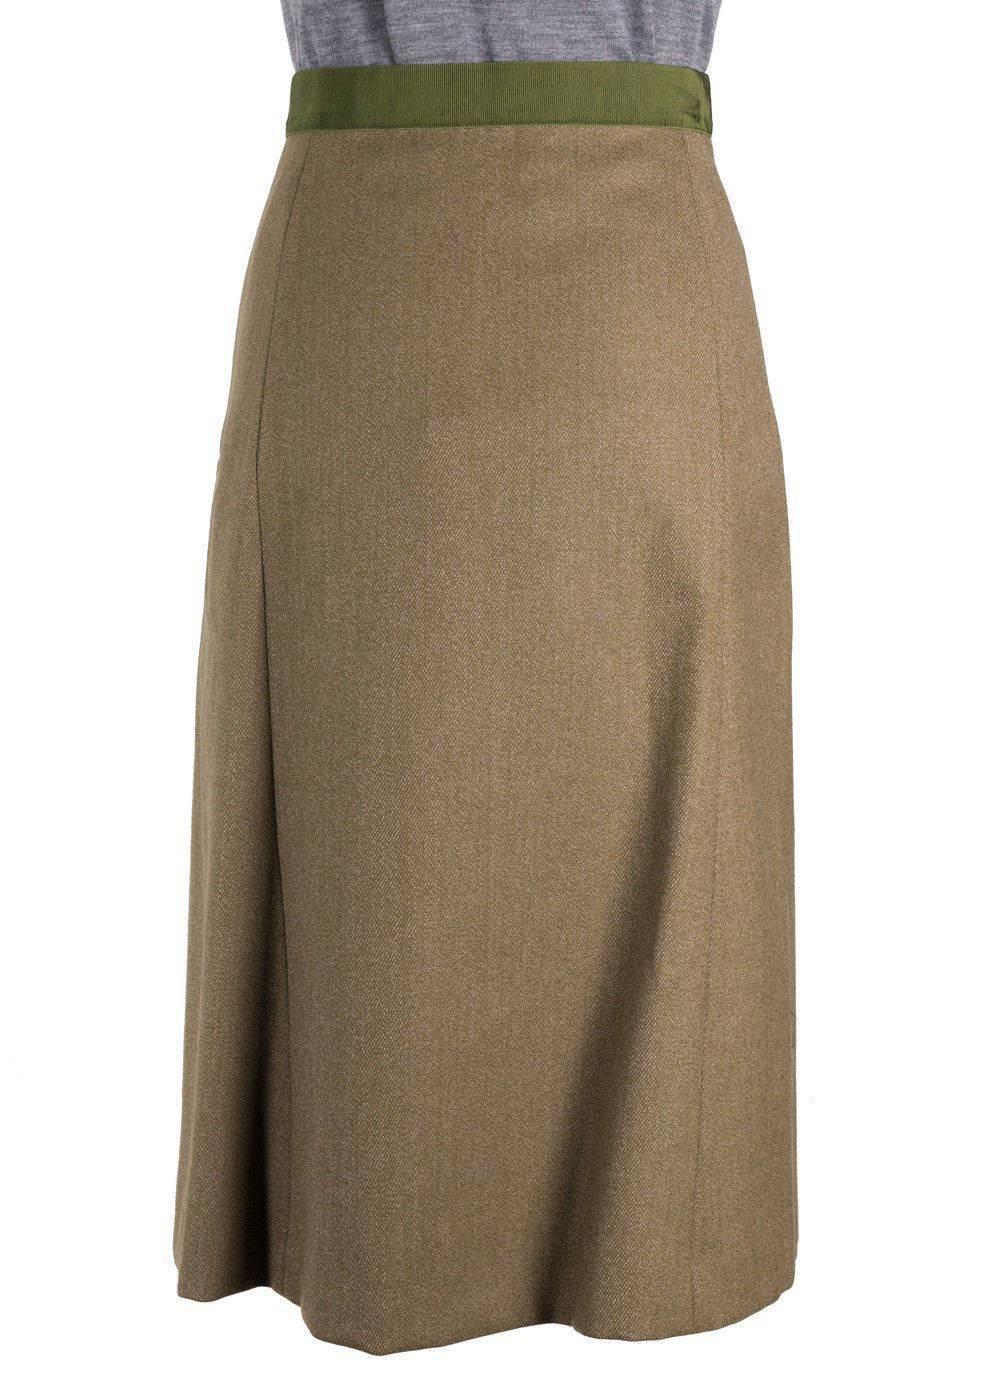 Brand New Maison Margiela Military Skirt
Original Tag & Hanger Included
Retails in Stores & Online for $1105
Size EUR 42 / US 4 Fits True to Size
 
Maison Margiela's military inspired skirt was is this seasons must have. The gold accented button